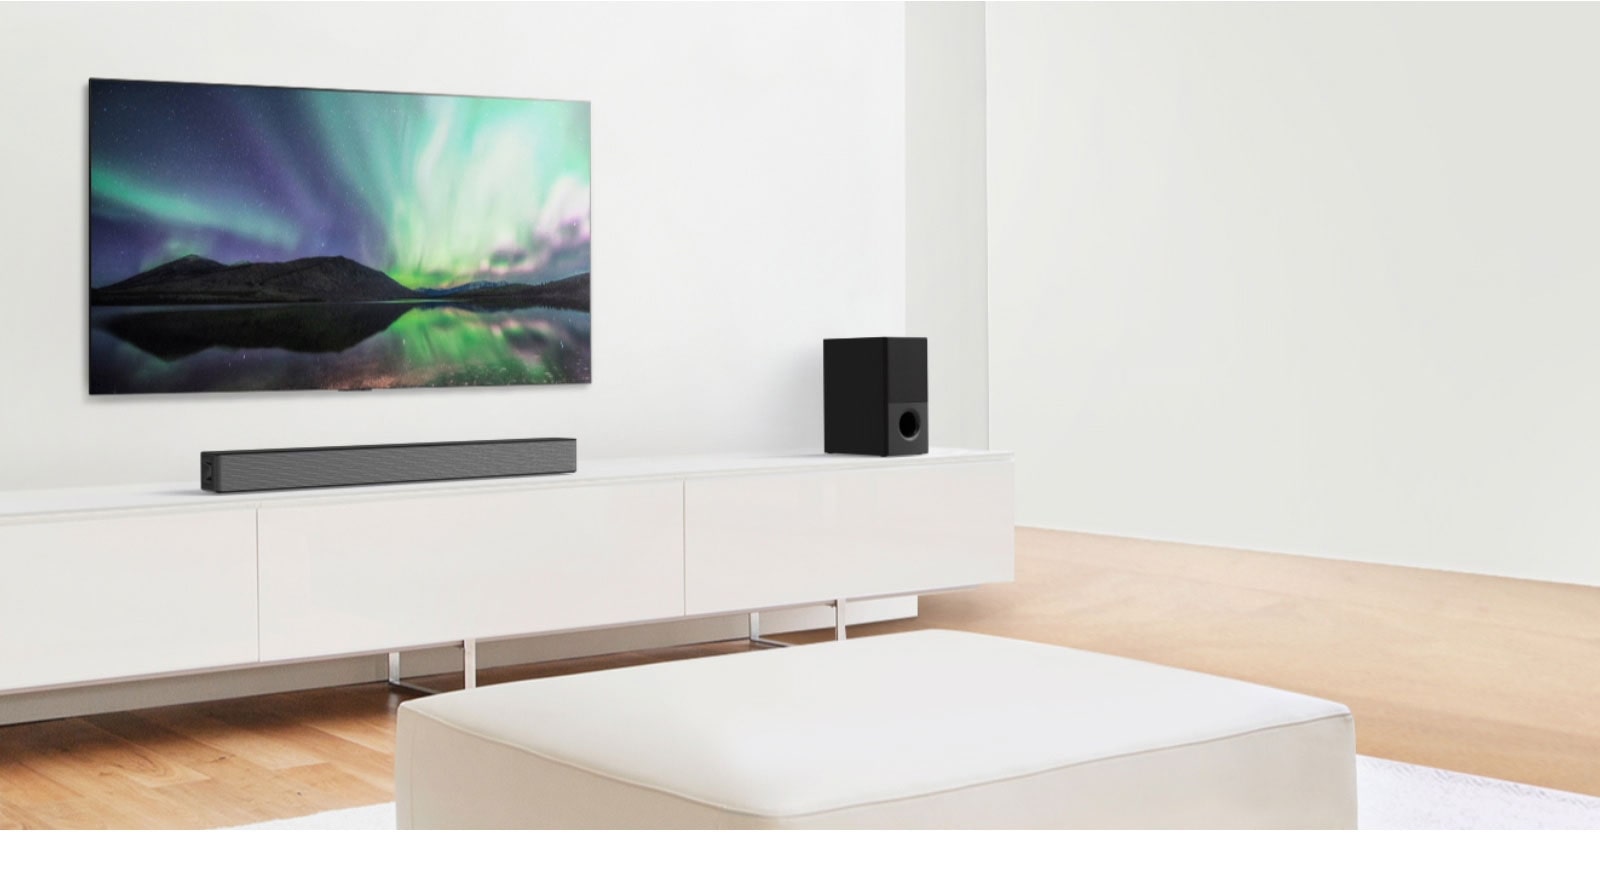 Video preview showing LG Soundbar in a white living room with 4.1 channel setup.